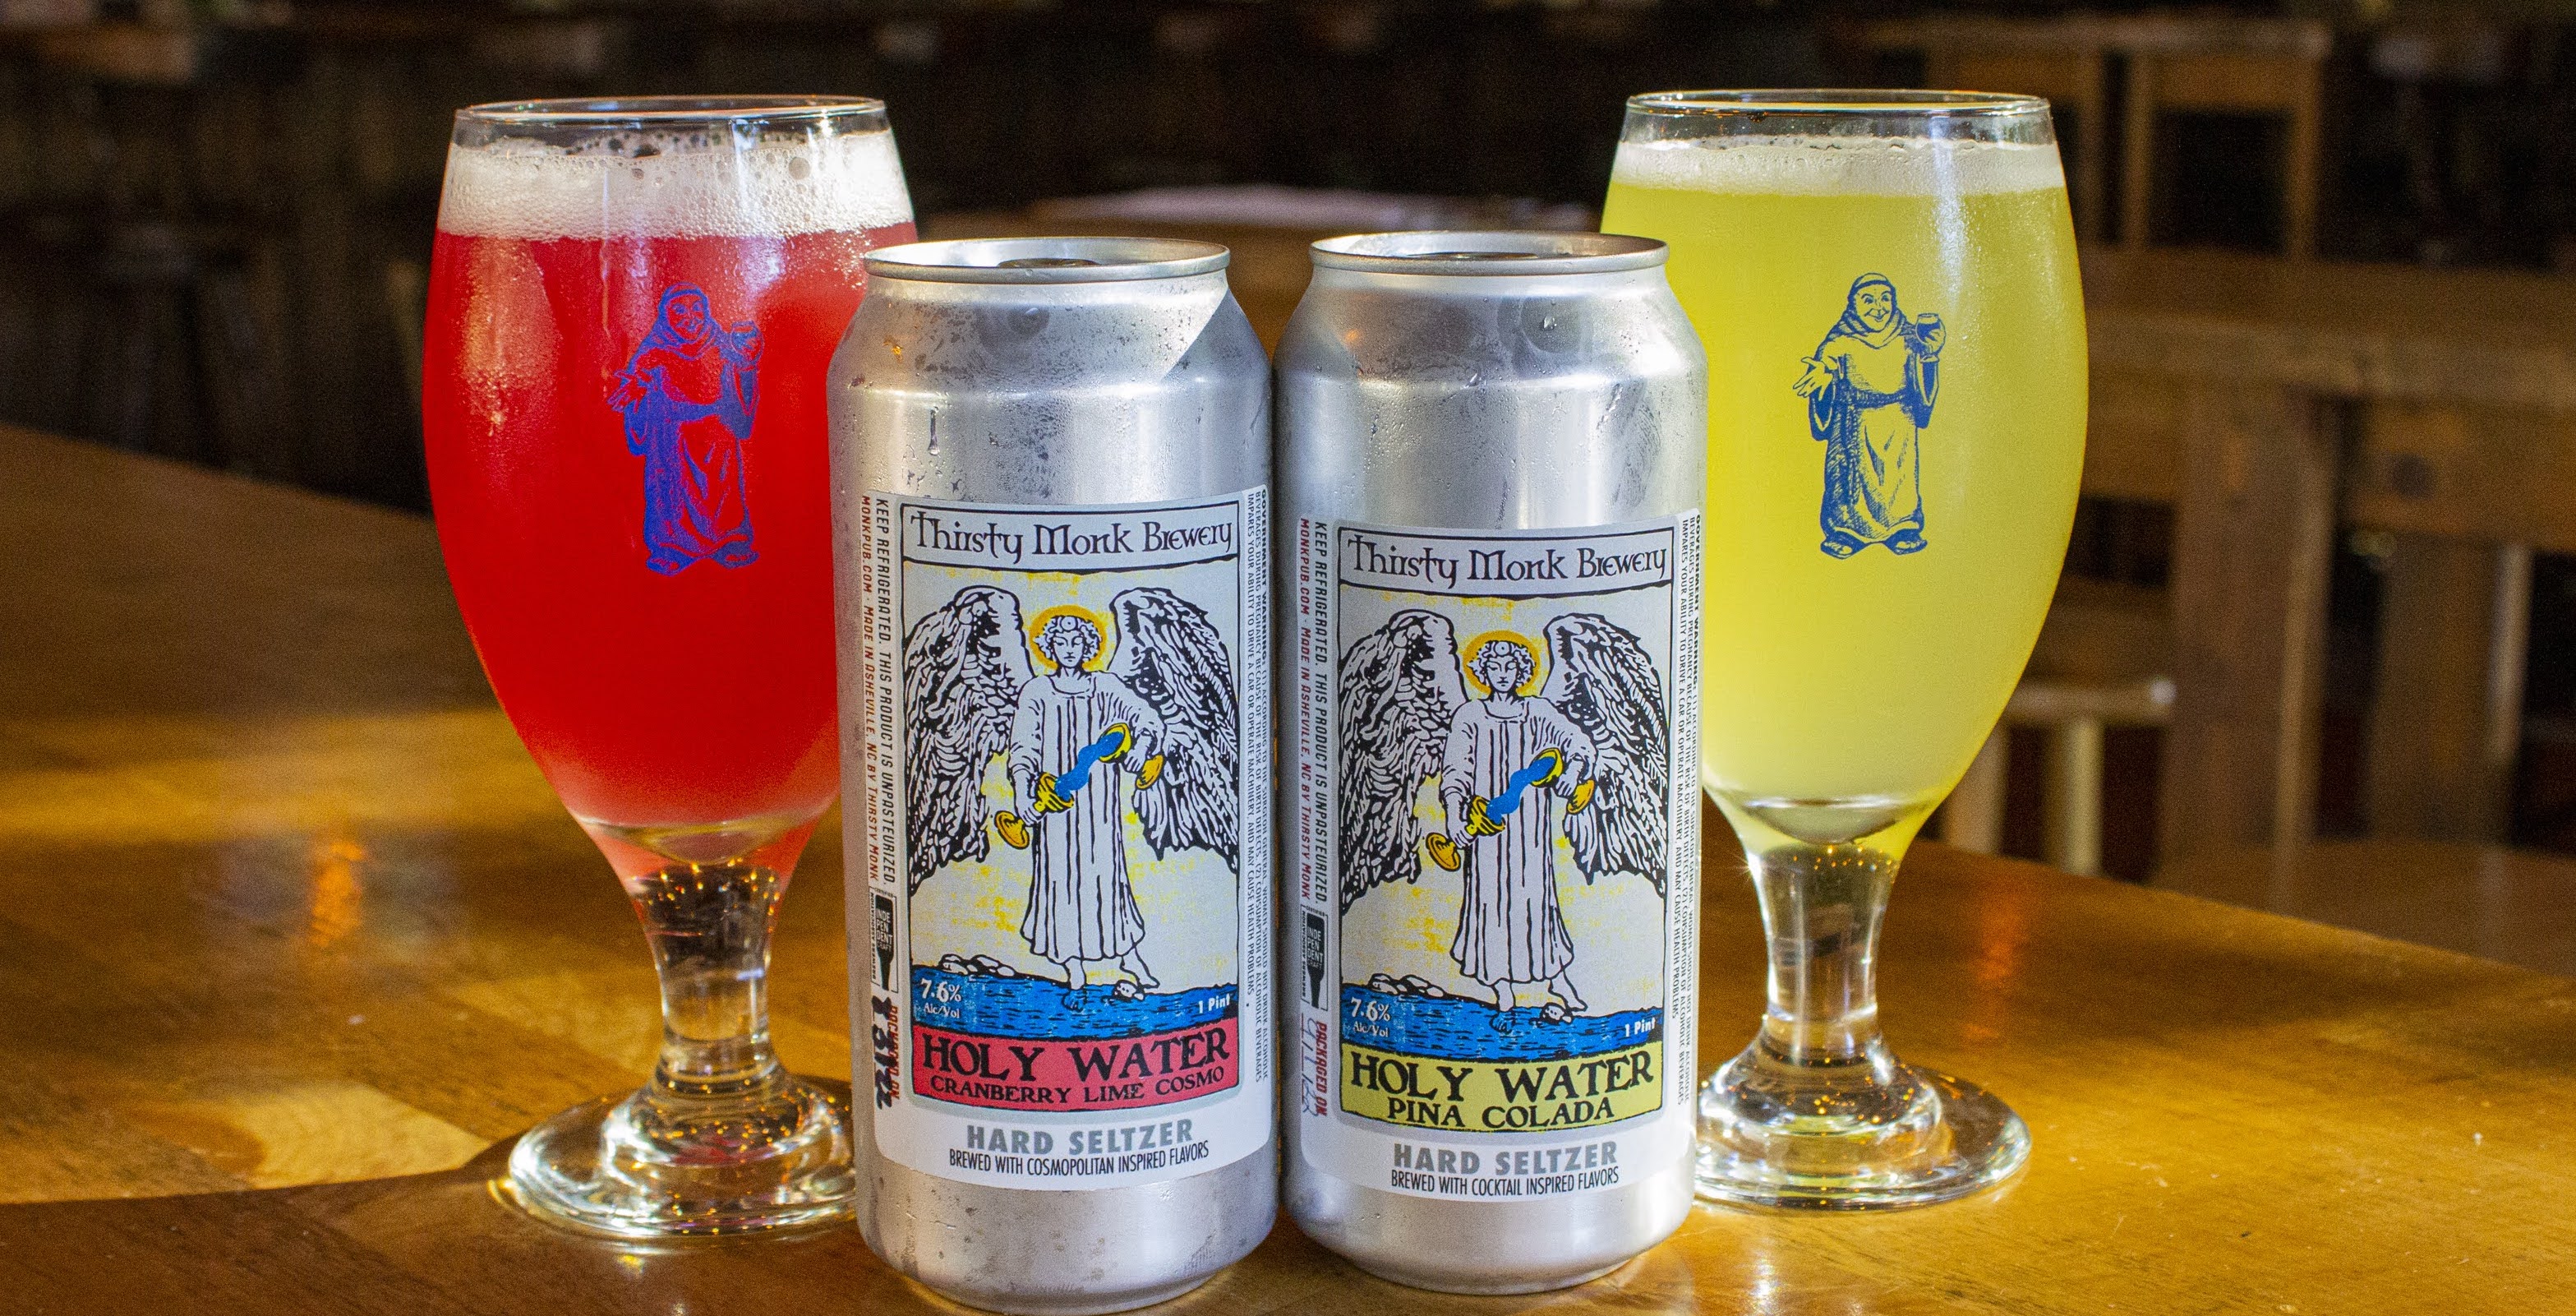 Holy Water Hard Seltzer by Thirsty Monk Brewery